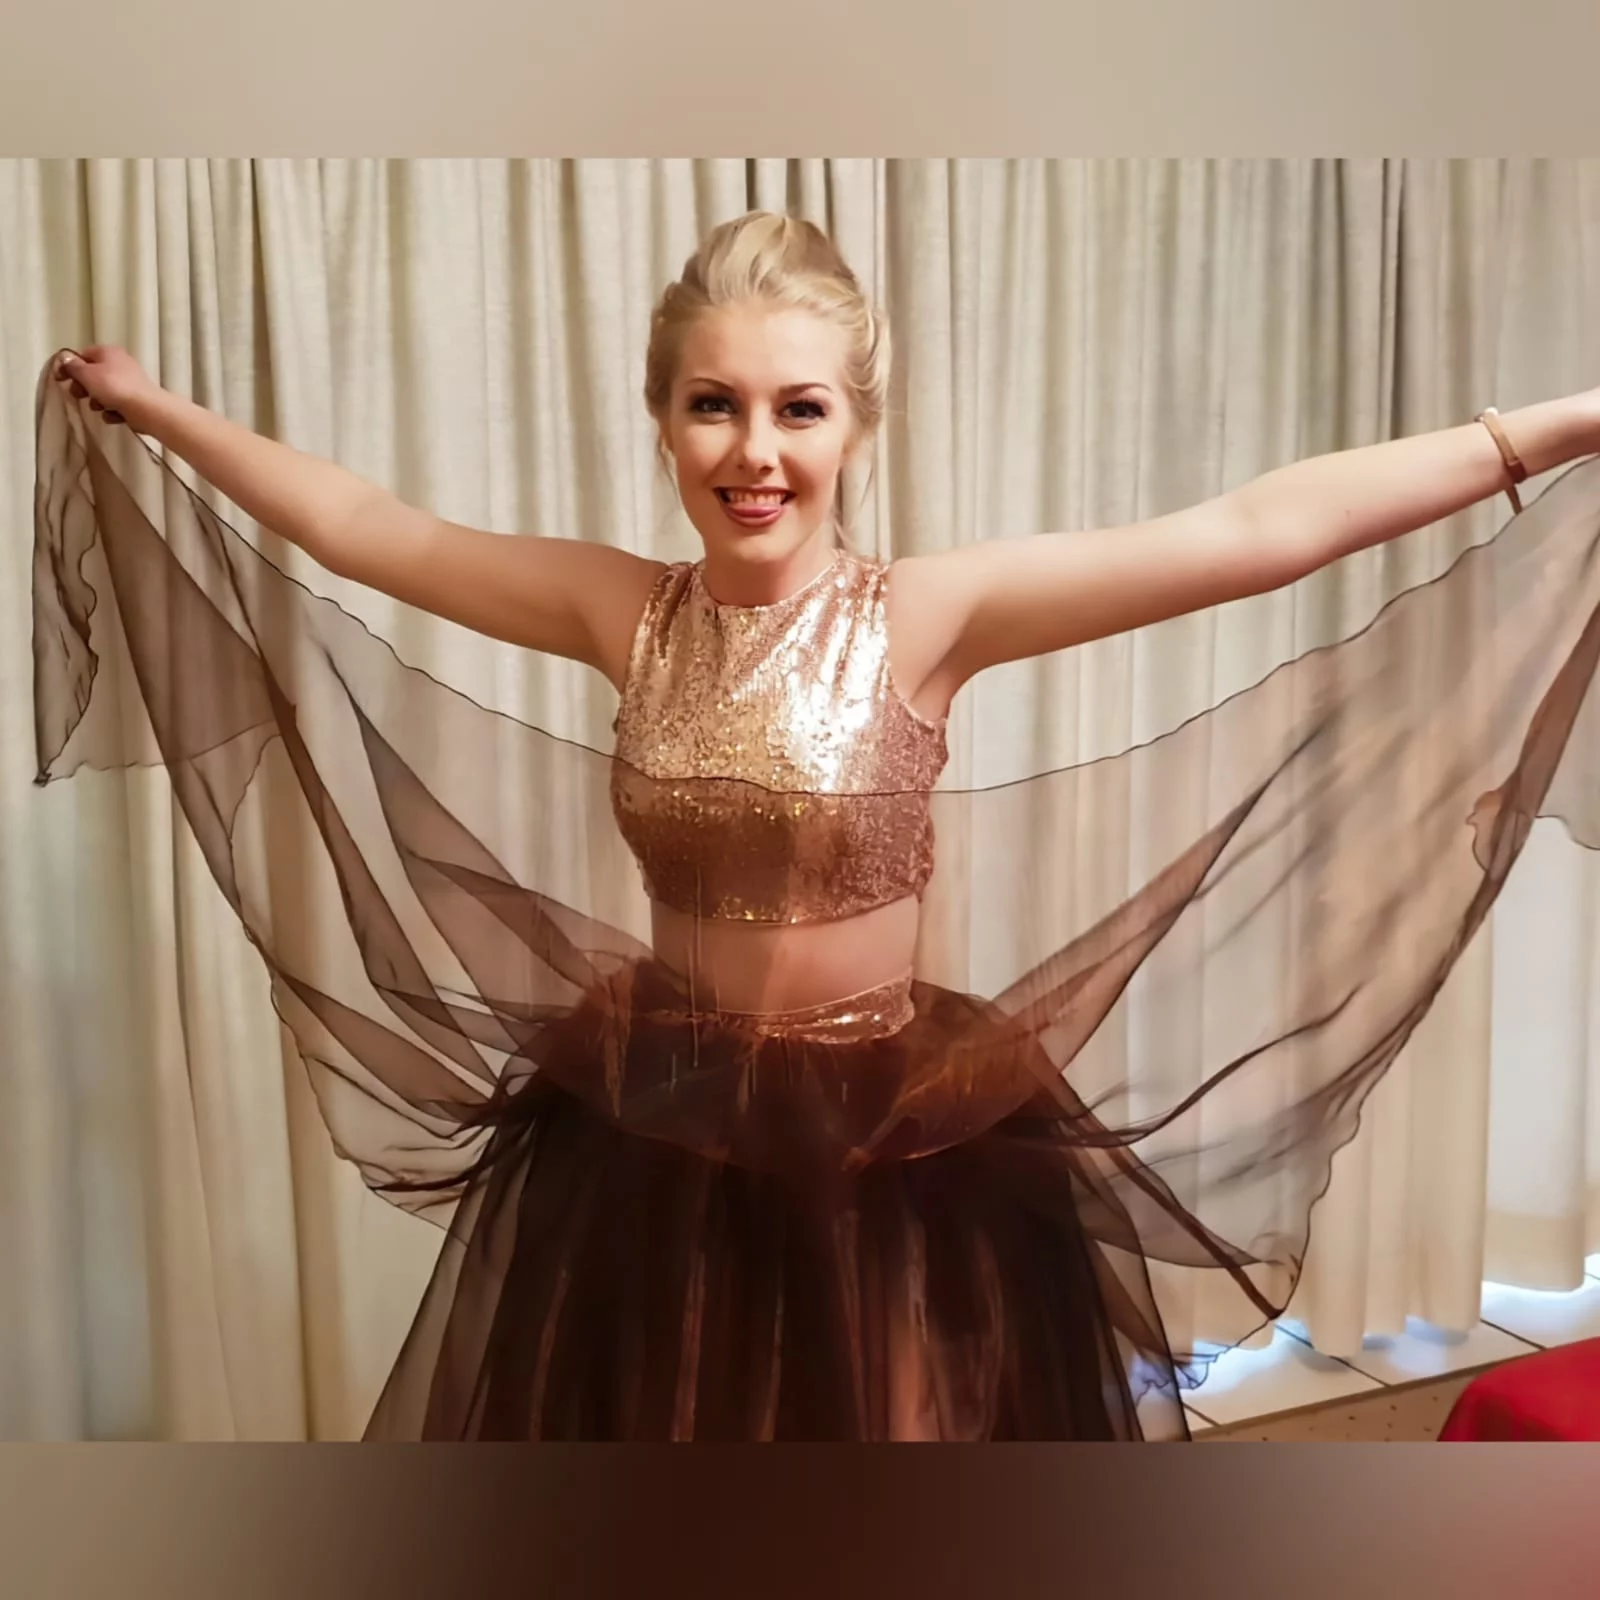 2 piece brown and rose gold matric farewell dress 3 this awesome versatile evening dress was created for a matric farewell dance. 2 piece brown and rose gold prom dress. With a layered organza full skirt and sequins waistband. Crop top in rosegold sequins which can be reused in several other occasions